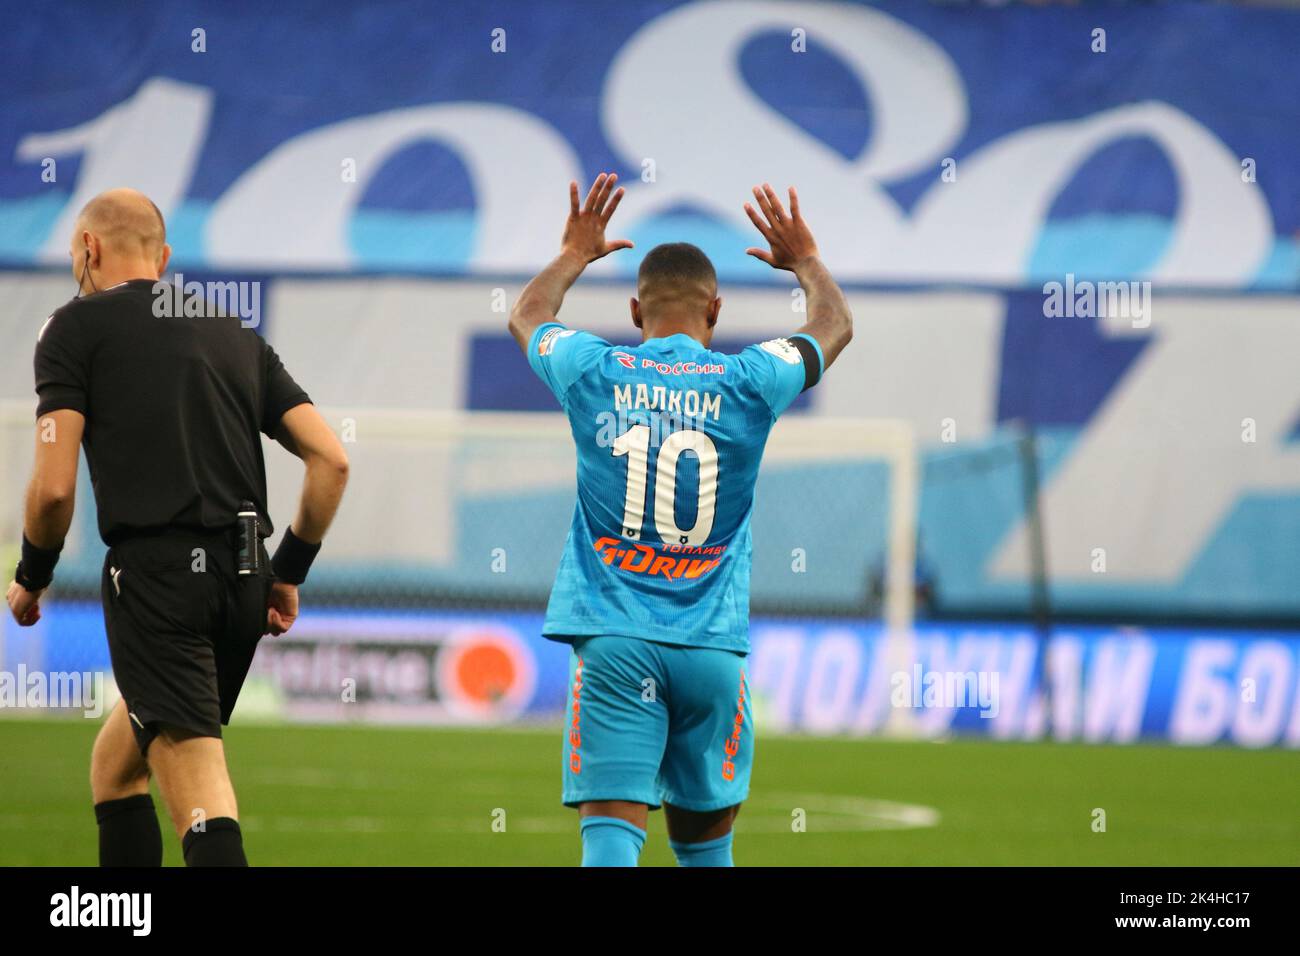 Saint Petersburg, Russia. 02nd Oct, 2022. Malcom Filipe Silva de Oliveira, commonly known as Malcom (No.10) of Zenit seen in action during the Russian Premier League football match between Zenit Saint Petersburg and Rostov at Gazprom Arena. Final score; Zenit 3:1 Rostov. (Photo by Maksim Konstantinov/SOPA Images/Sipa USA) Credit: Sipa USA/Alamy Live News Stock Photo